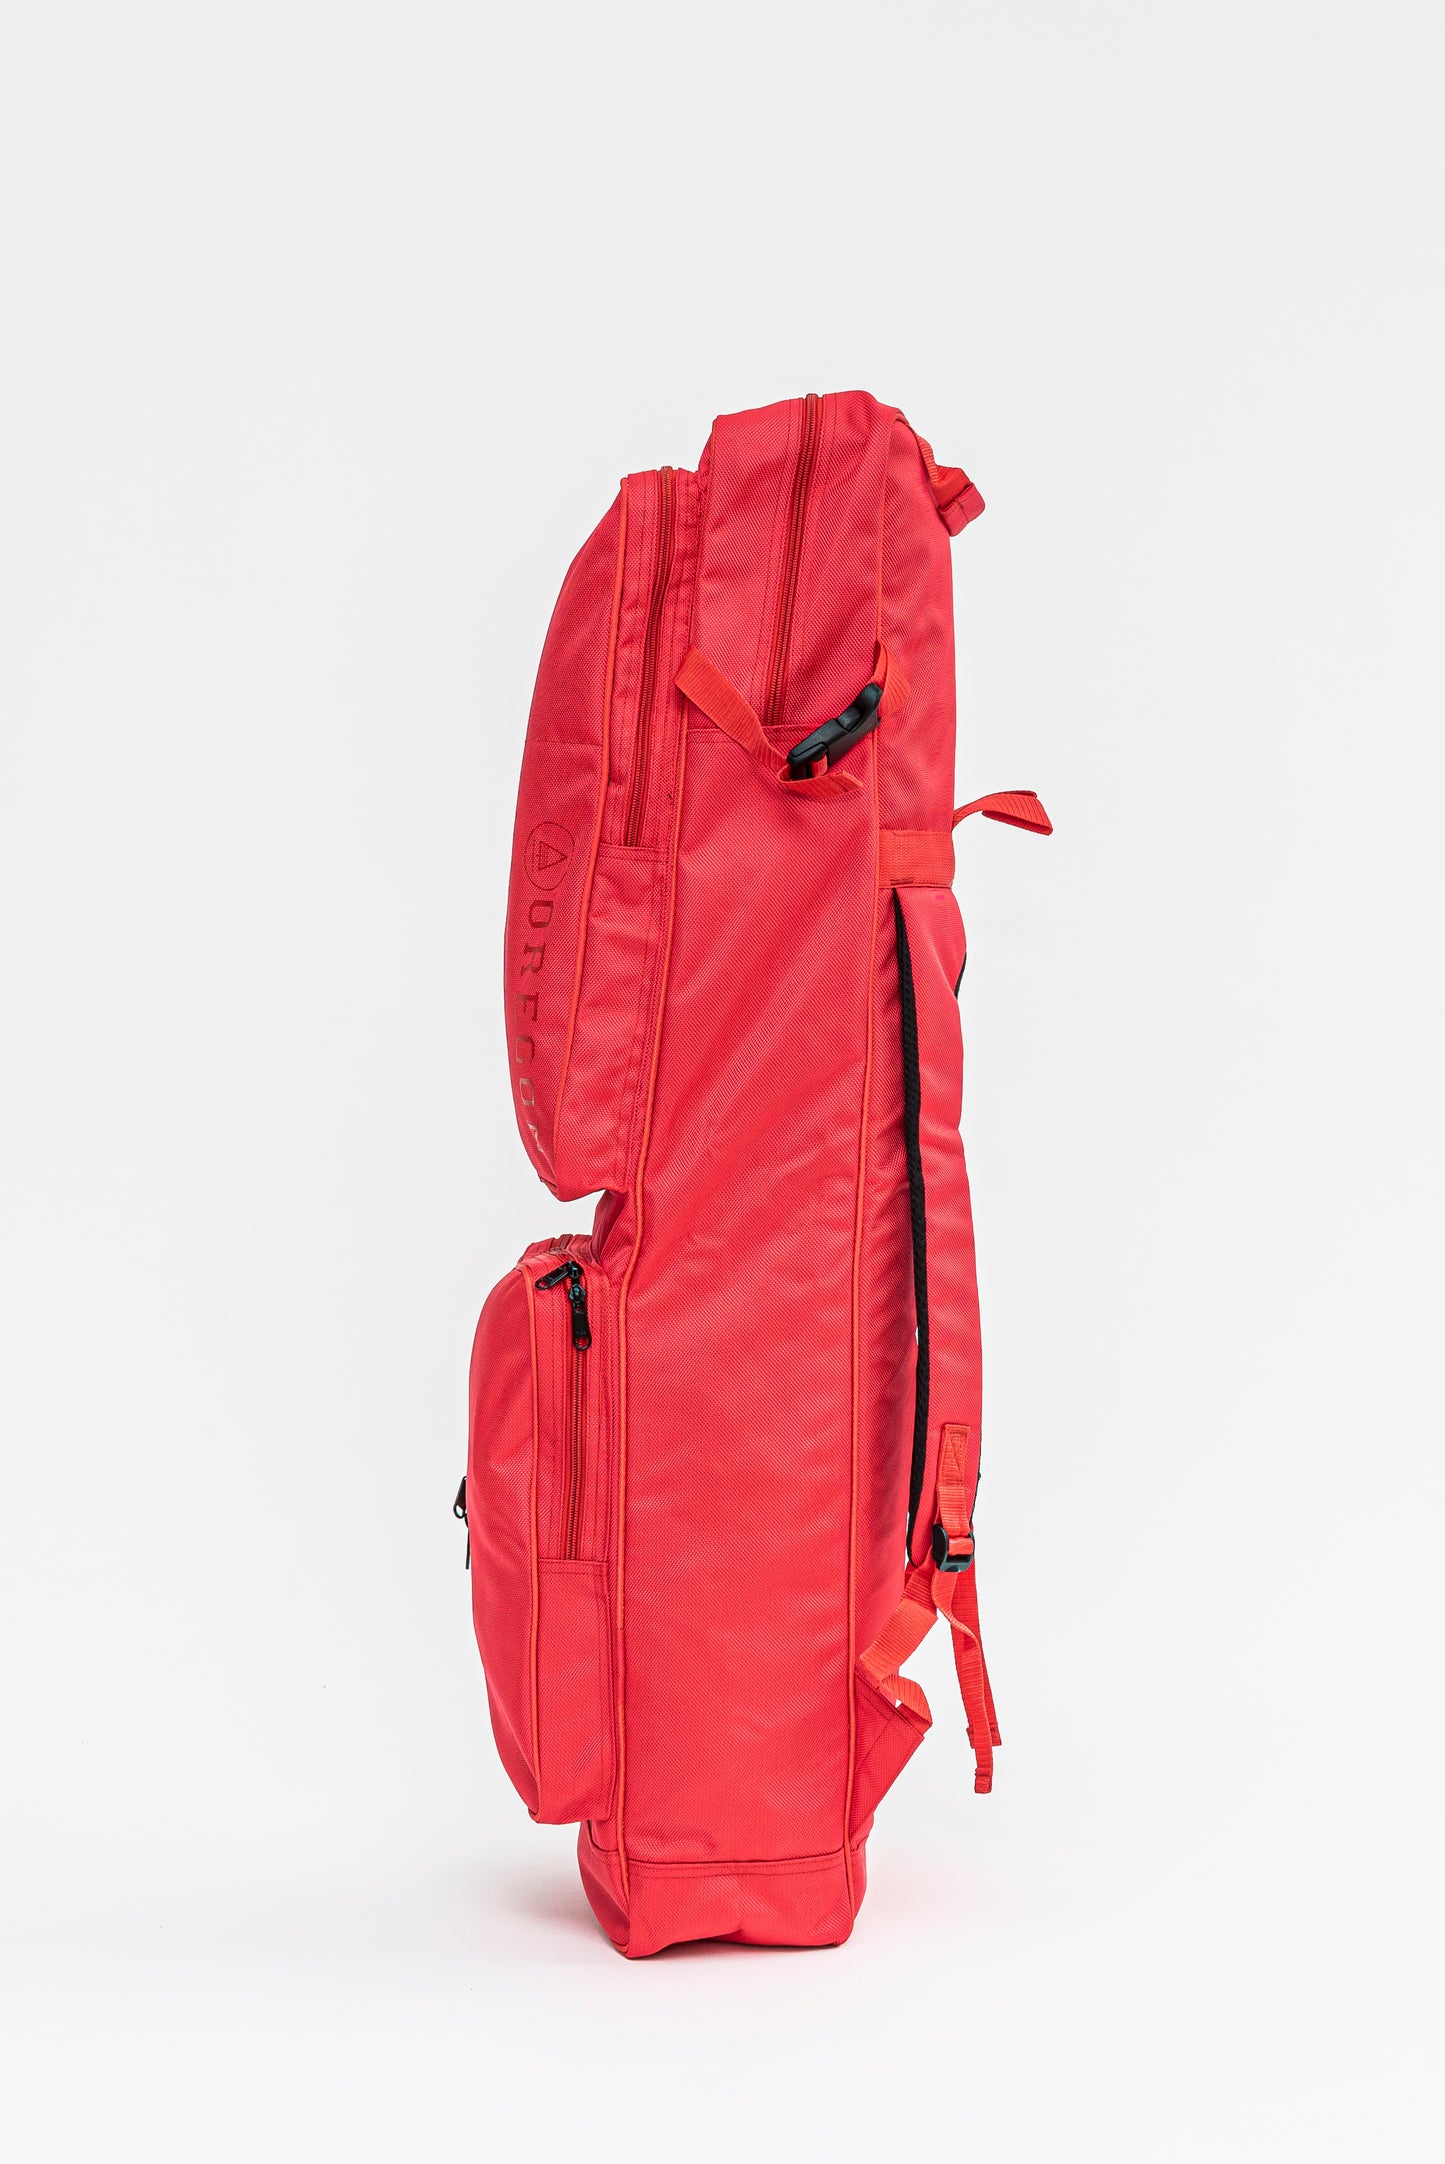 AUTHENTIC PROBAG RED